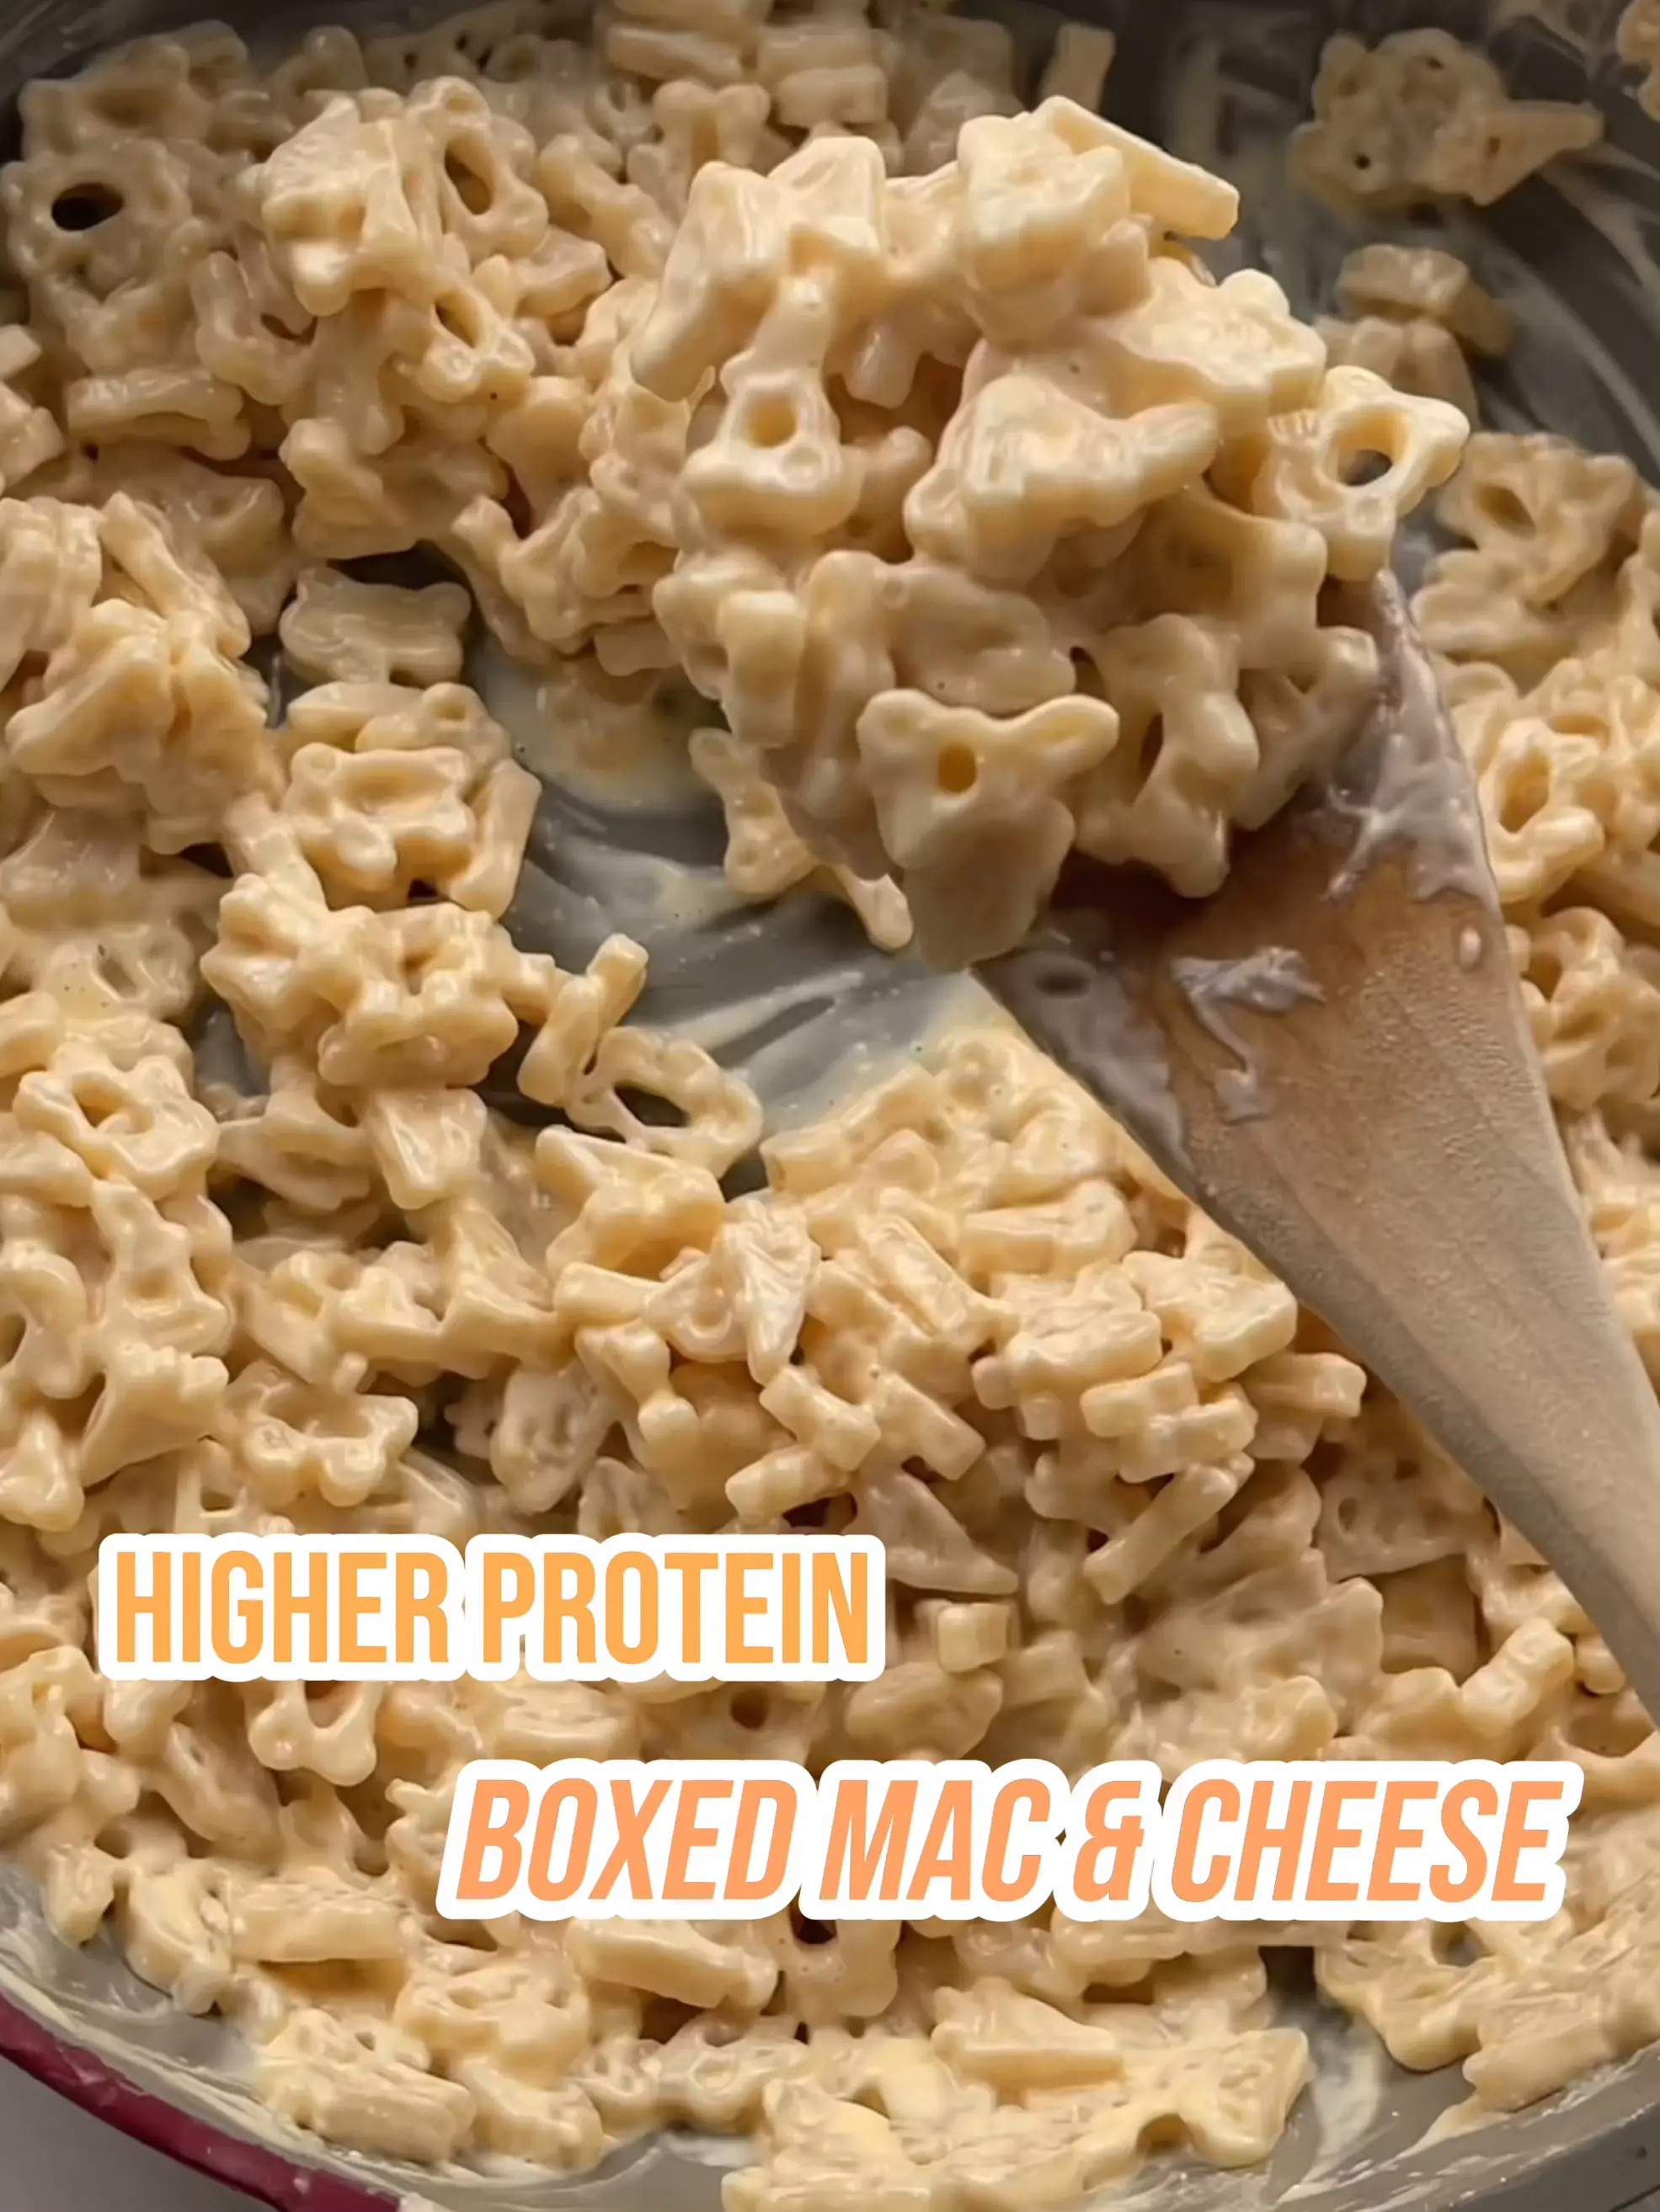 HIGHER PROTEIN BOXED MAC & CHEESE ✨✨✨